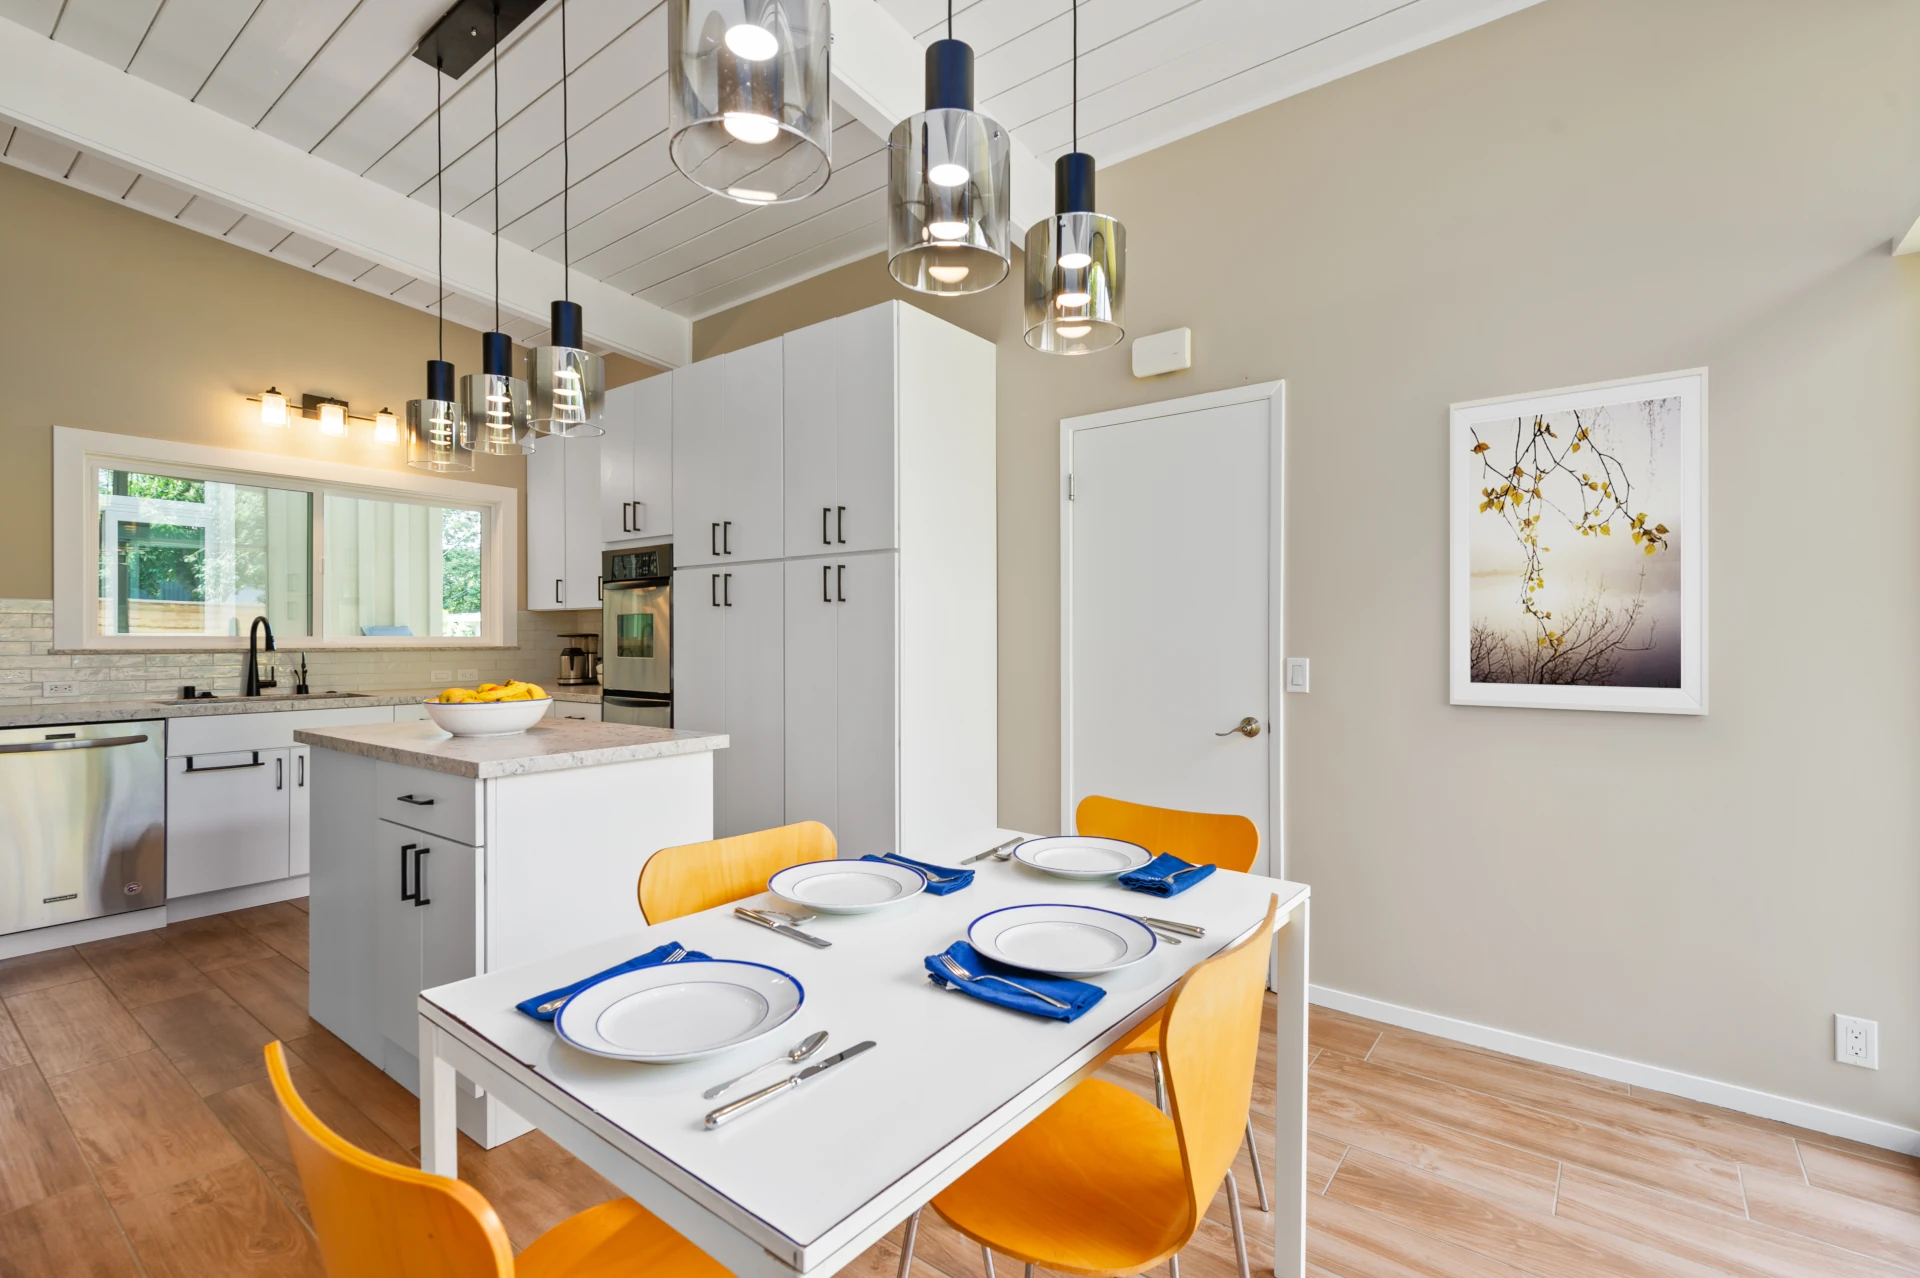 Modern kitchen and dining area with white cabinetry, beige walls, white quartz countertops, stainless-steel dishwasher and double oven, wood floors and a white rectangular table with four wood chairs.